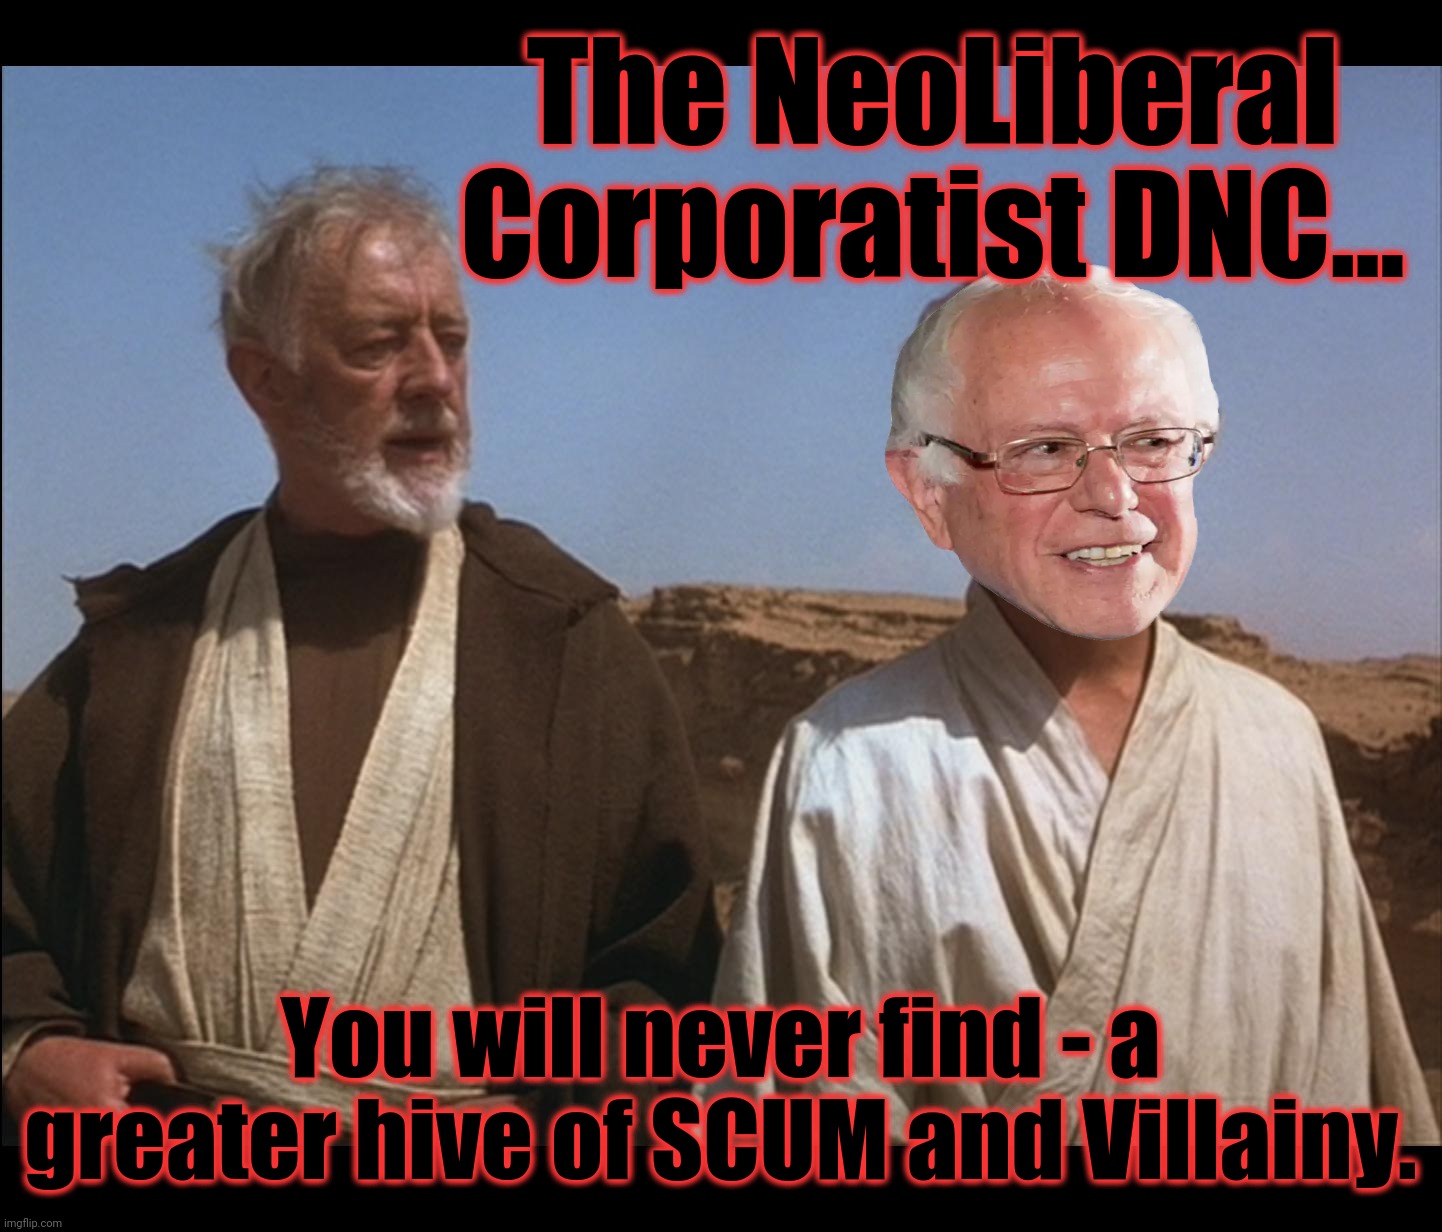 The Corporatist Democrats - there are no depths - to which they will not stoop. | The NeoLiberal Corporatist DNC... You will never find - a greater hive of SCUM and Villainy. | image tagged in dncleaks,rigged elections,election fraud,election theft 2016 and 2020,memes,dnc fraud lawsuit | made w/ Imgflip meme maker